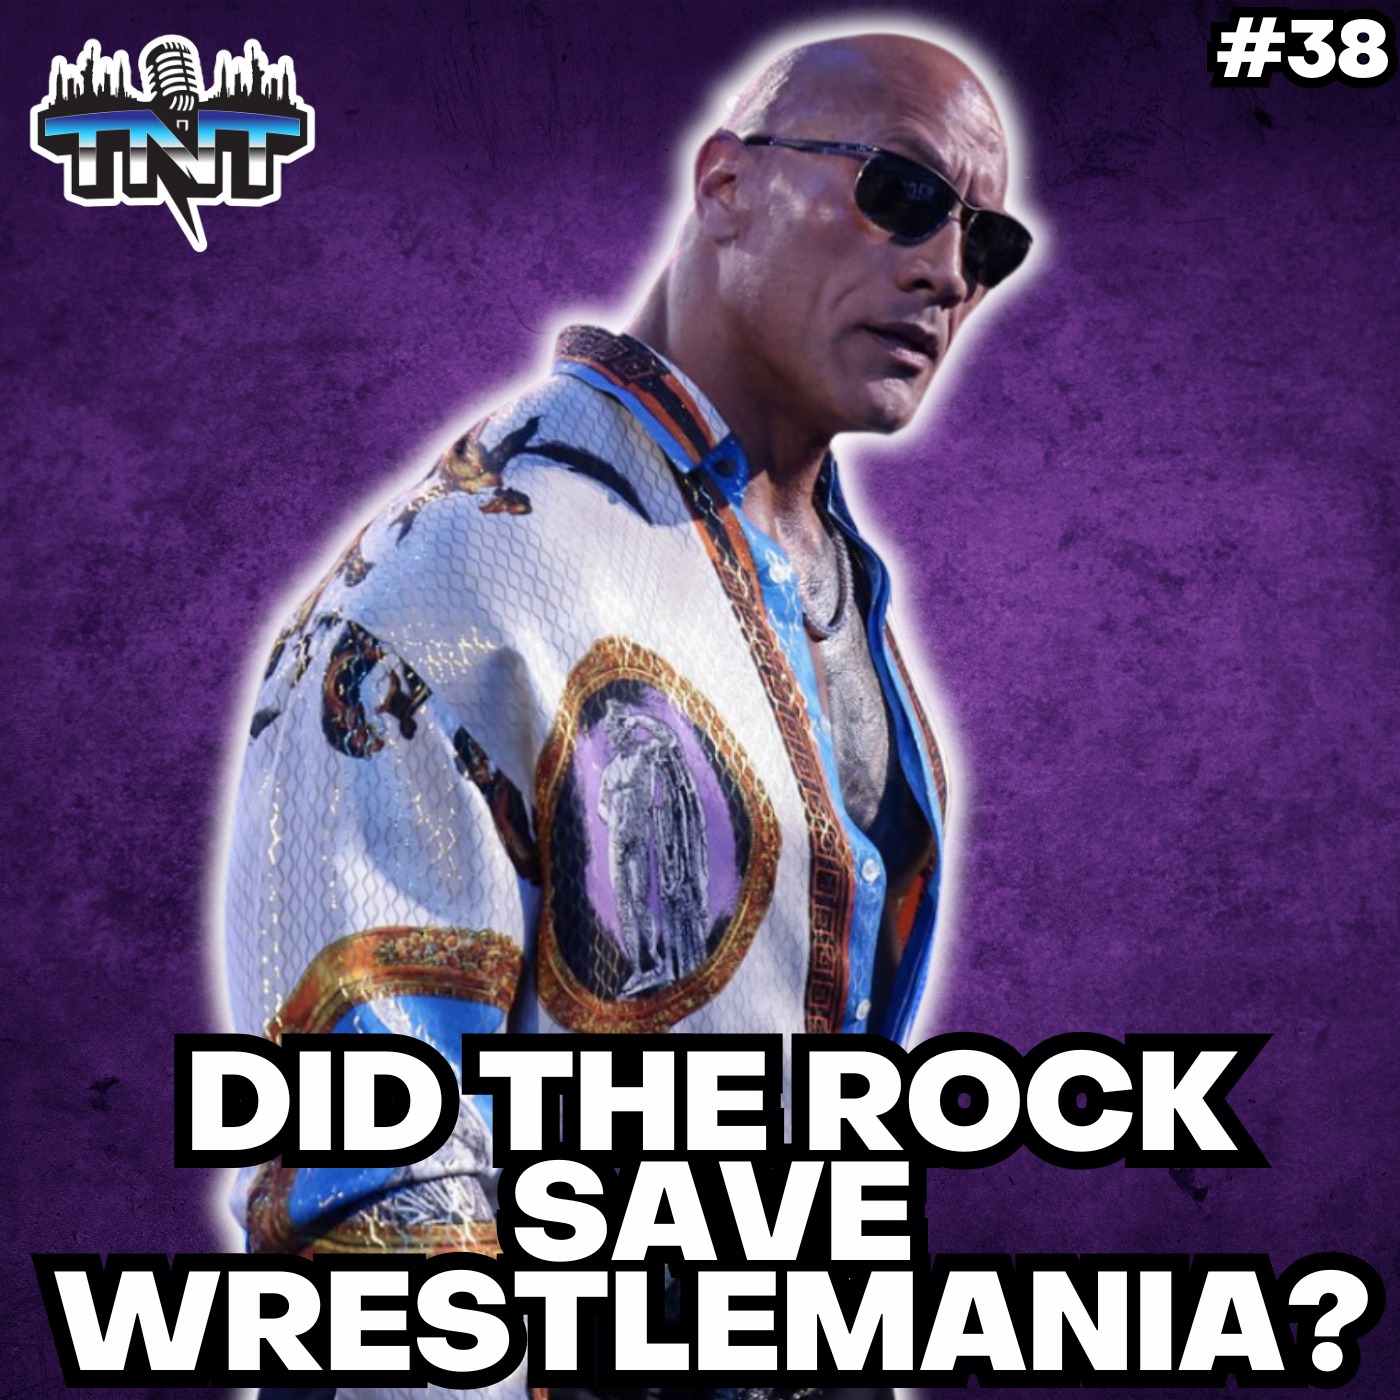 Tuesday Night Titans Ep. 38 | Did The Rock SAVE WrestleMania Last Friday With His TWO Massive Promos? A Look Ahead To What May Be The Biggest Turning Point In AEW History Following AEW Revolution